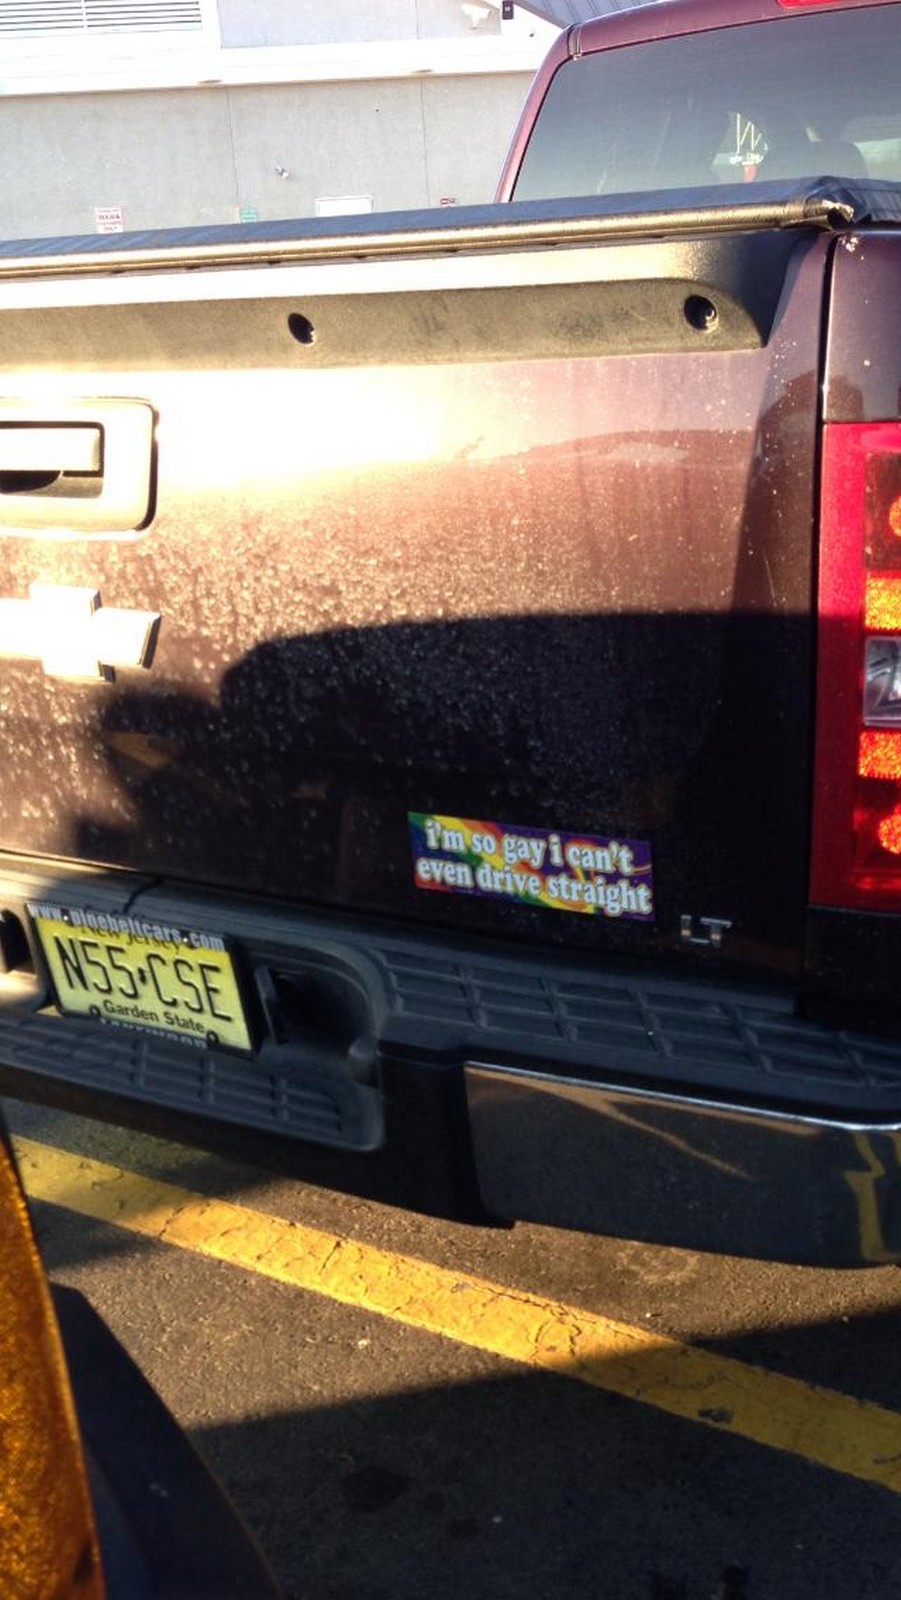 27 Funny Bumper Stickers - Say it with pride!